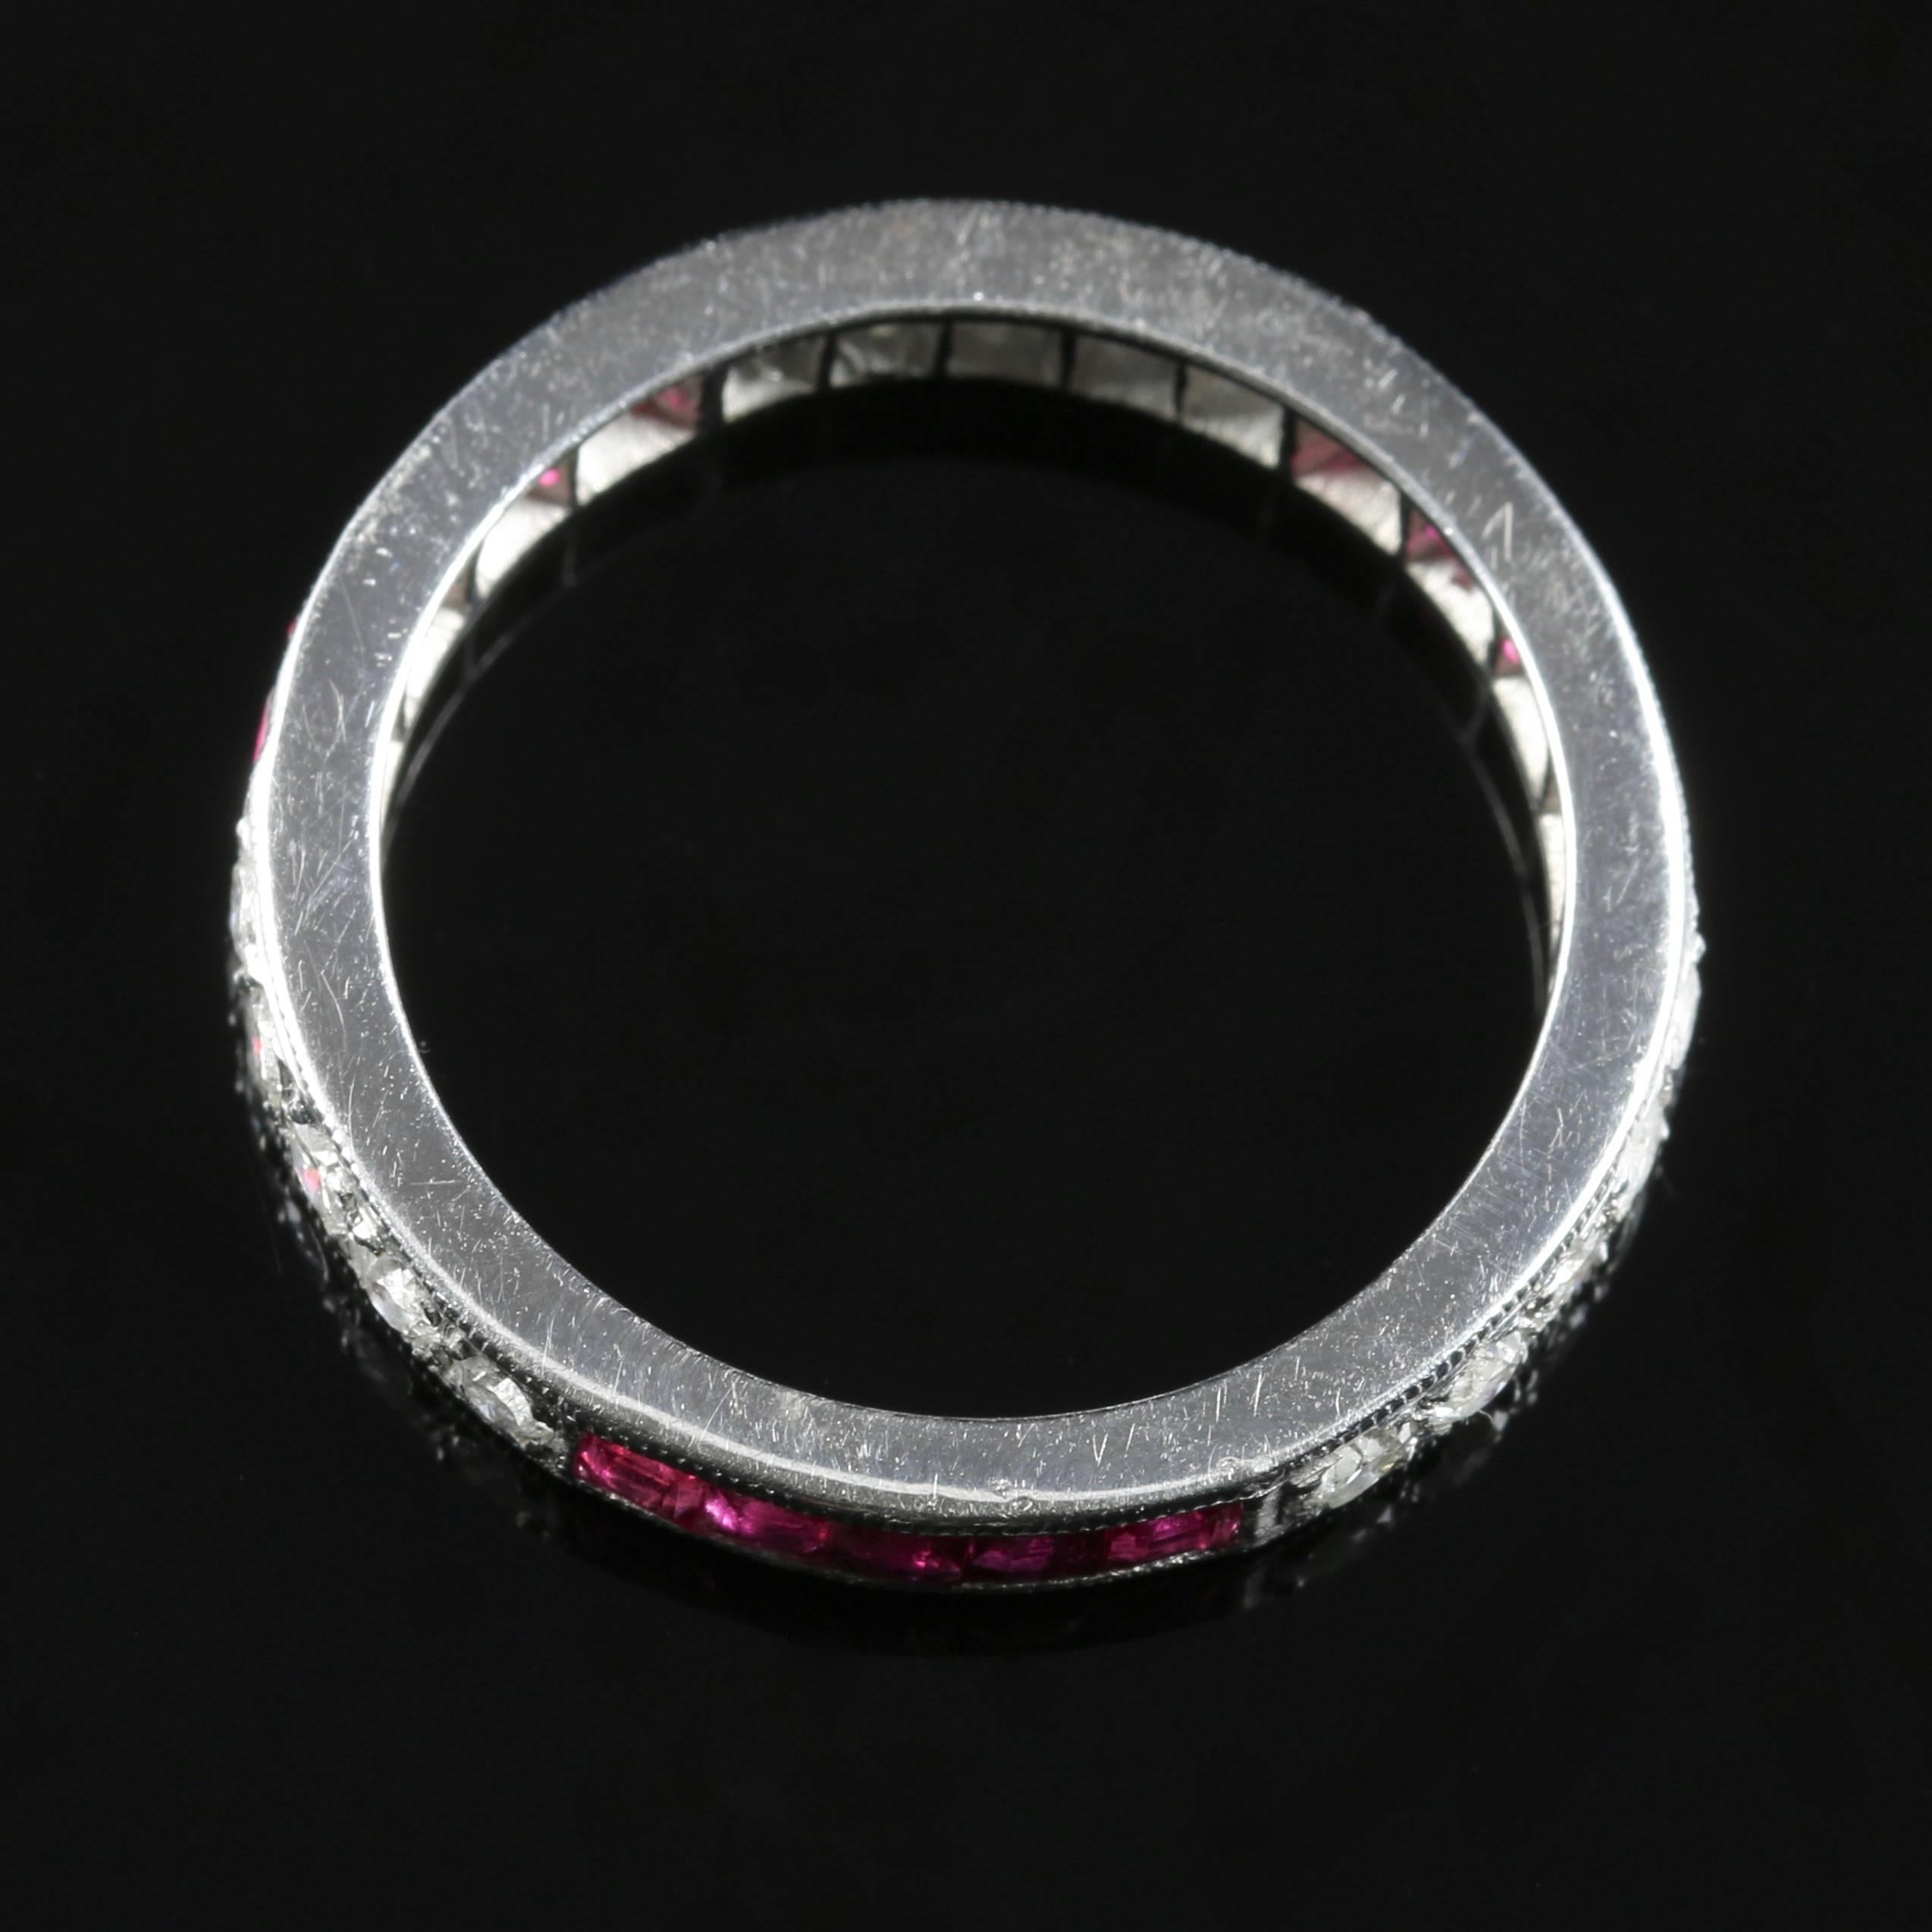 This fabulous full eternity ring is 18ct white gold set with Old Cut Diamonds which are Circa 1900 and French Cut Rubies. 

The lovely old cut Diamonds compliment the fabulous rich pink Rubies making this ring a real statement piece.

The Diamonds